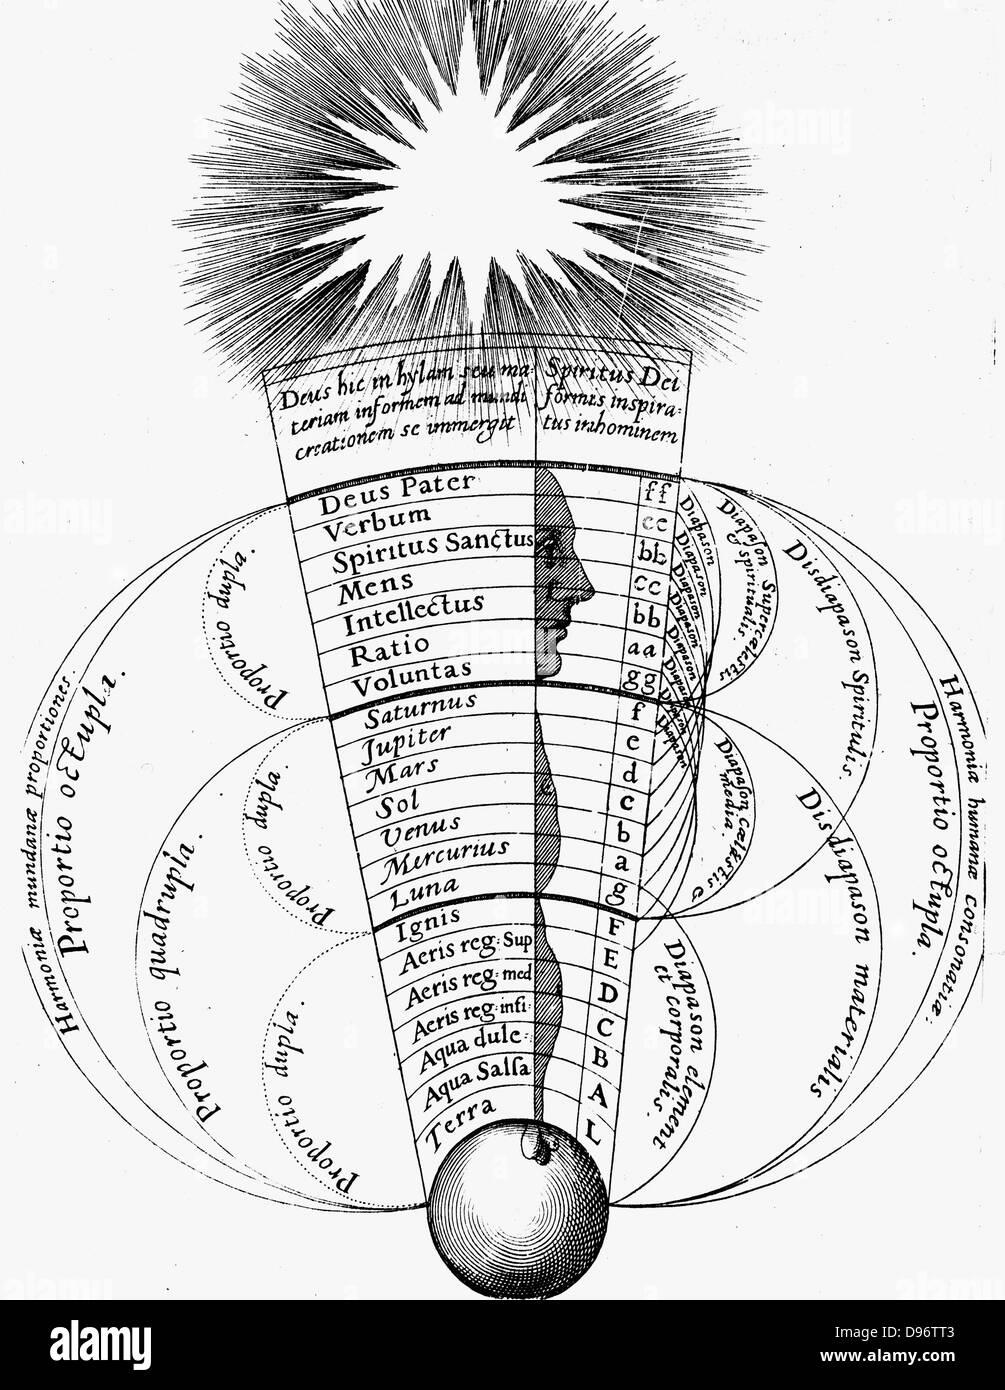 The divine harmony existing between Man, the microsm, the universe, macrocosm, with God at the top. From Robert Fludd 'Utriusque cosmi ... historia', Oppenheim, 1617-1619. Engraving . Stock Photo